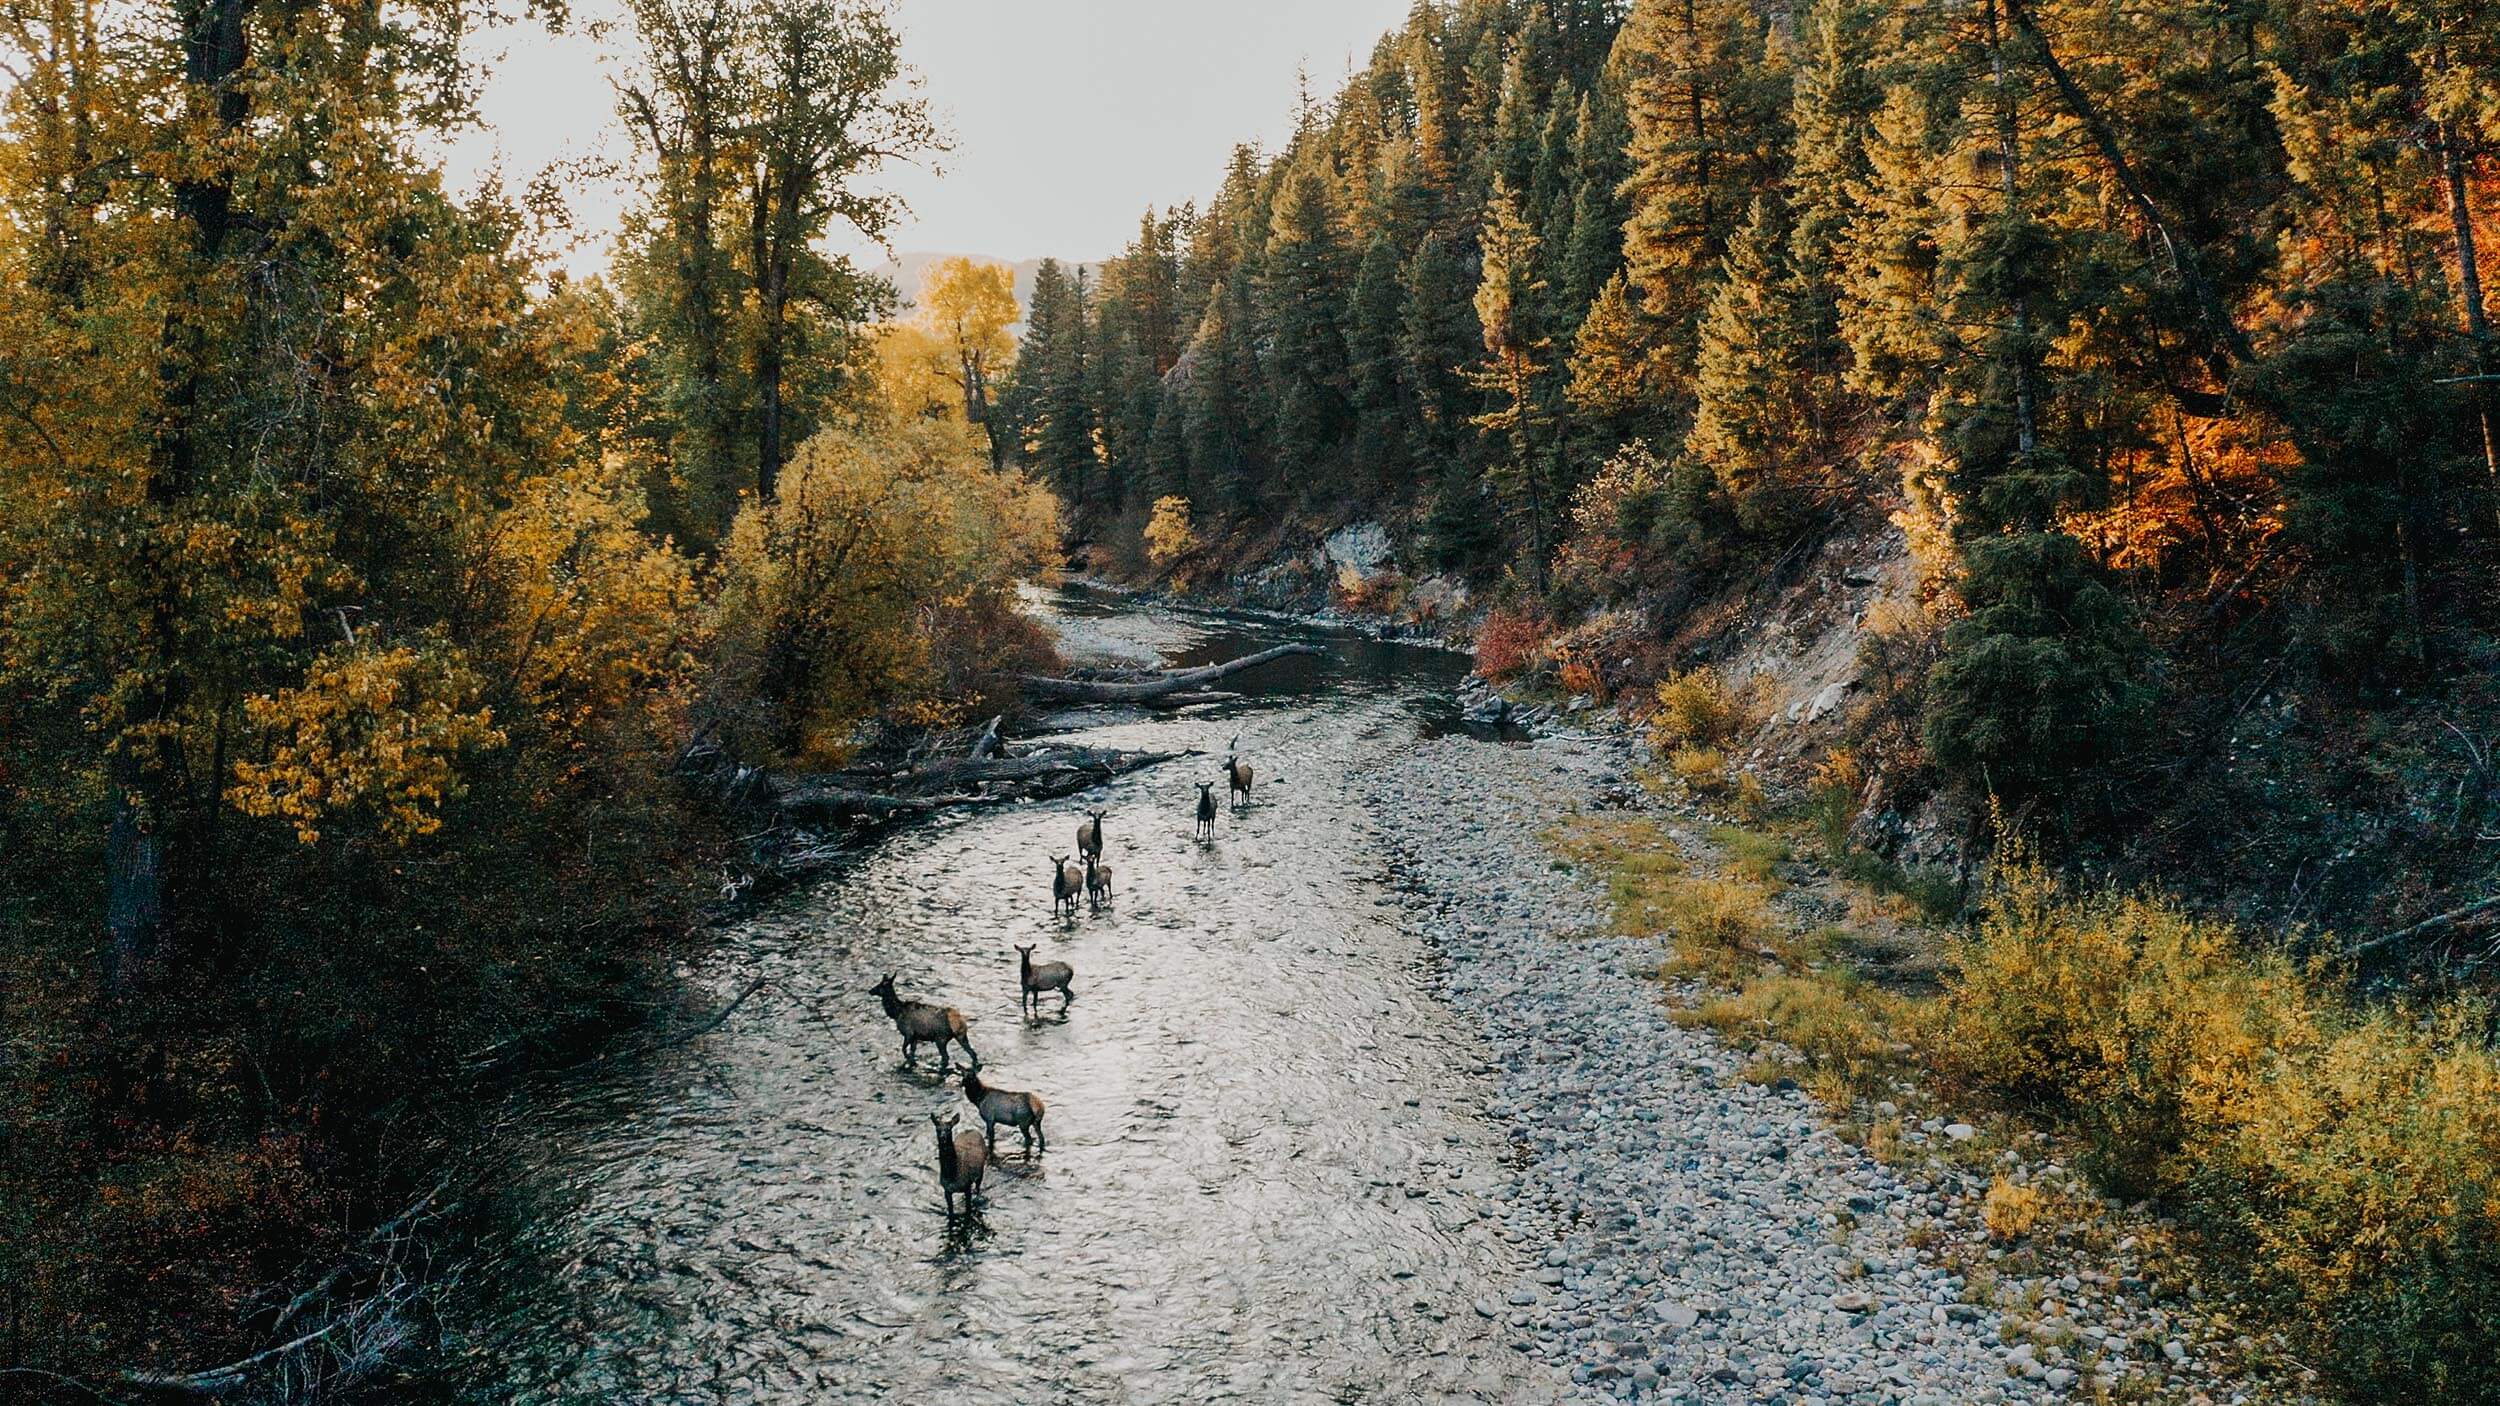 Several deer standing in a river surrounded by green and yellow trees.